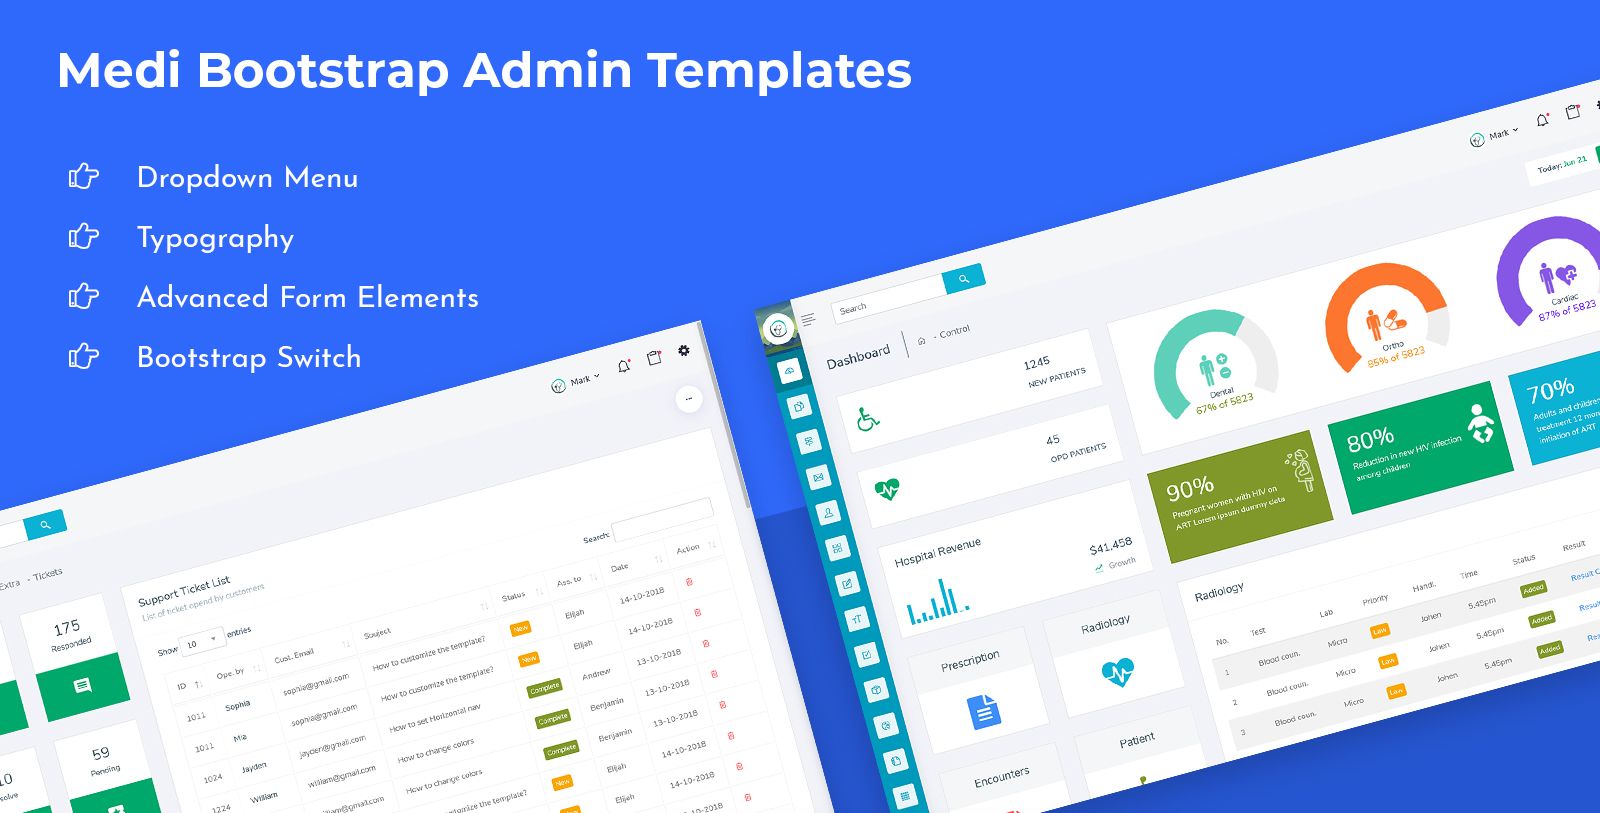 Responsive Bootstrap Admin Templates With Admin Dashboard UI Kit – Medi